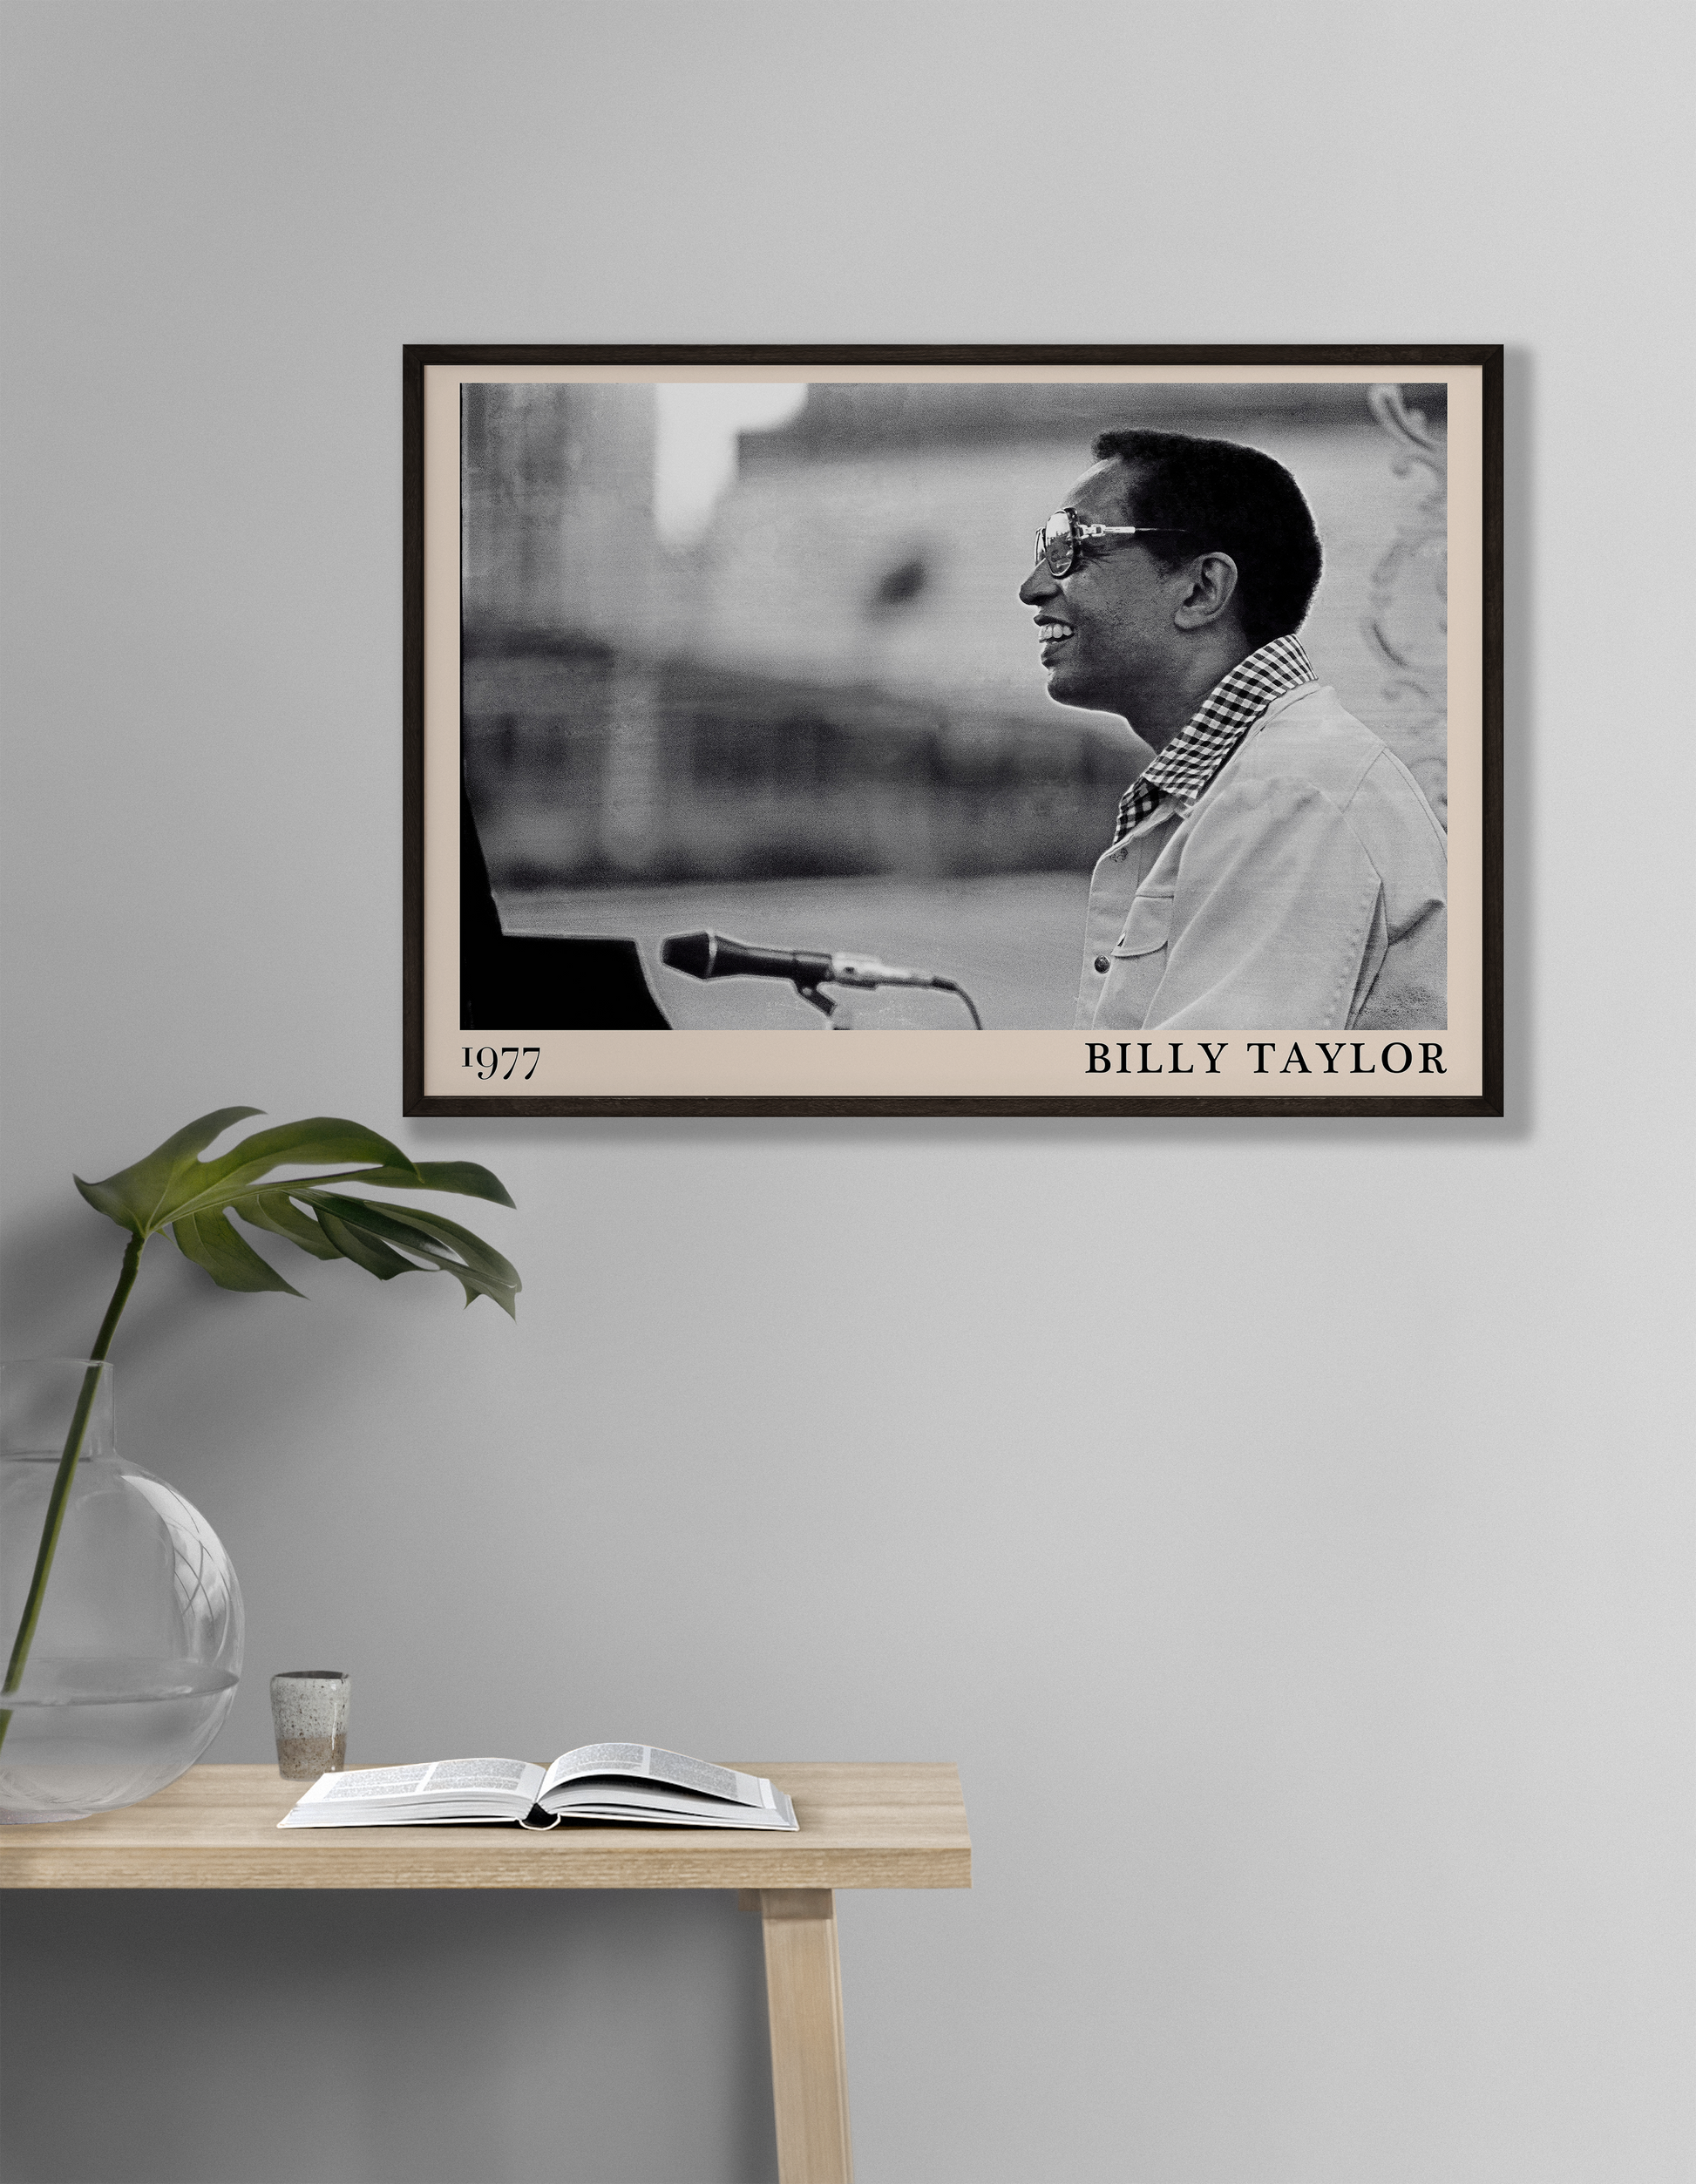 1977 photograph of Billy Taylor taken by Thomas Marcello. Picture crafted into a cool black framed jazz print, with an off-white border. Poster is hanging on a off-white living room wall